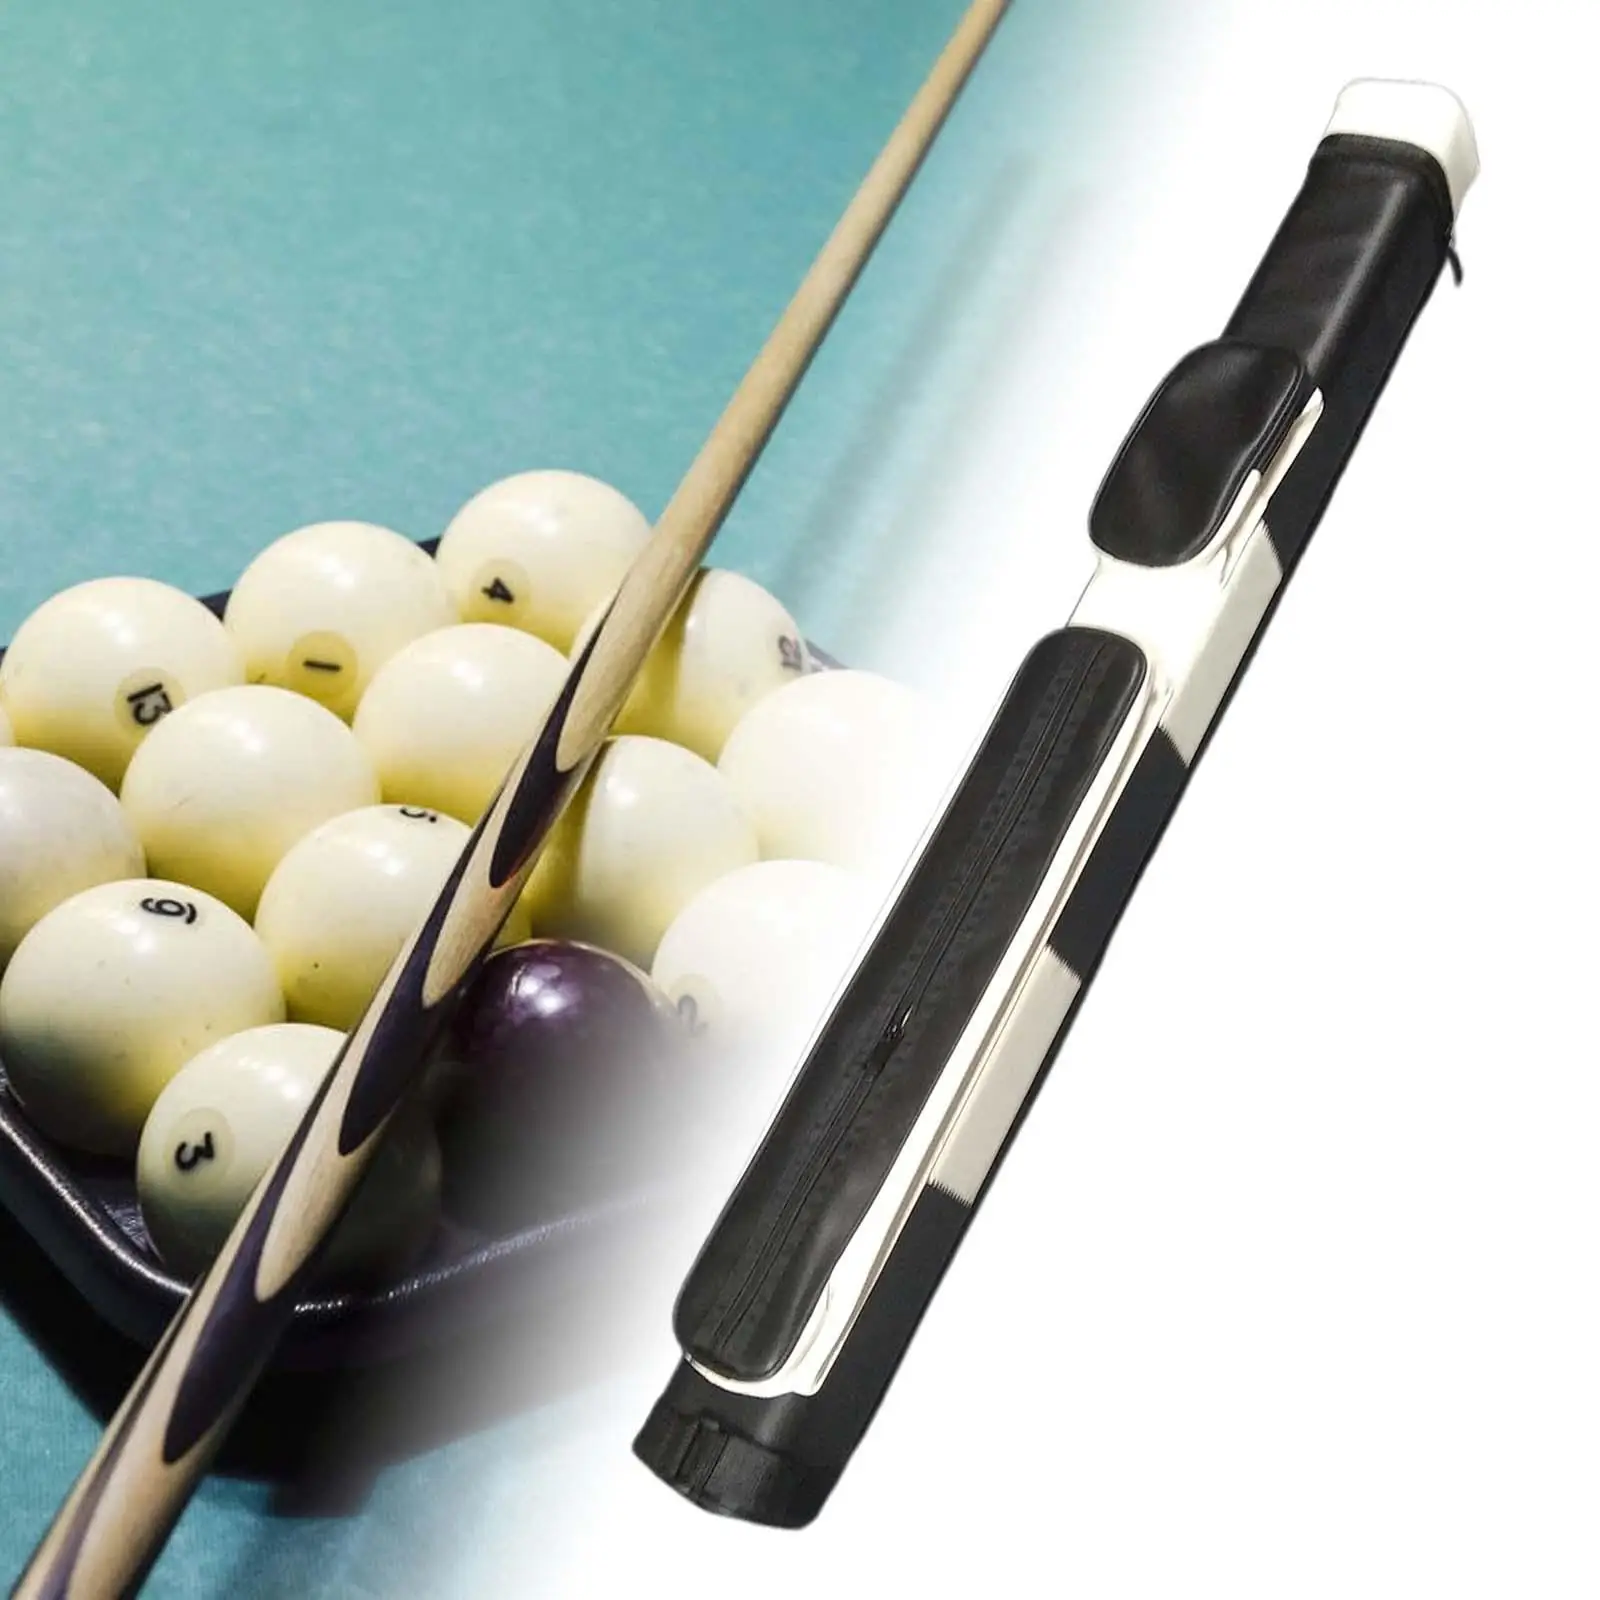 1/2 Pool Cue Case with External Pocket Portable Billiard Pool Cue Sticks Carrying Case with Divider Hard Tube Billiards Supplies